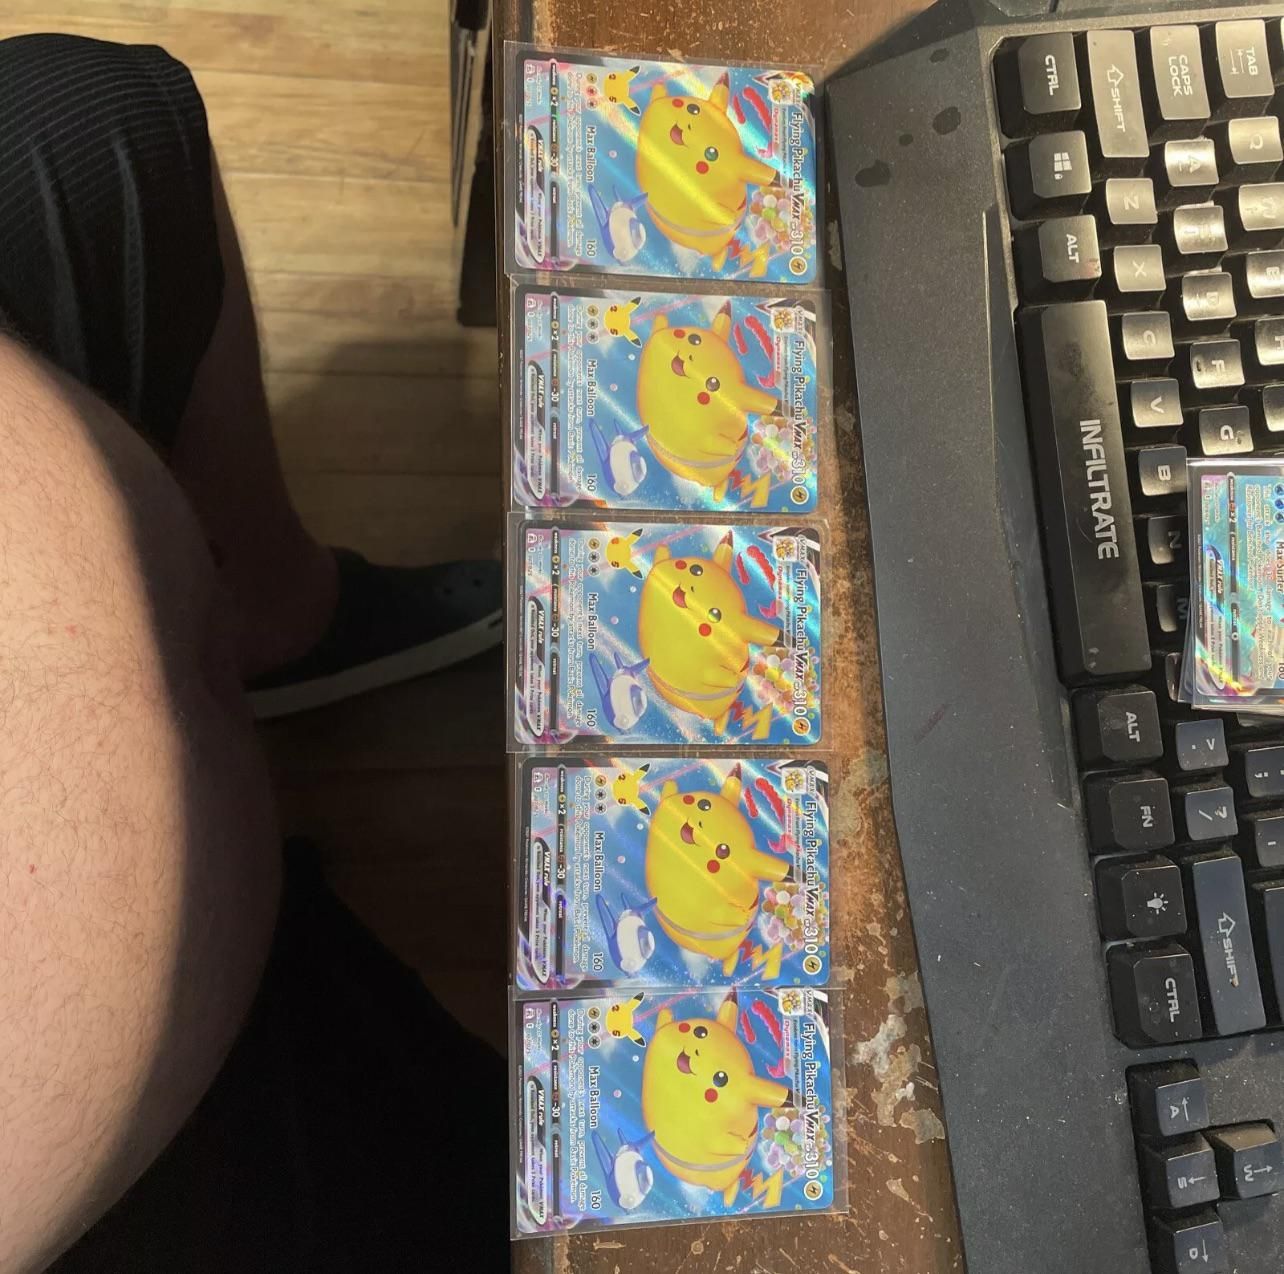 So I messaged a guy on eBay to show me more photos of his Pikachu collection…